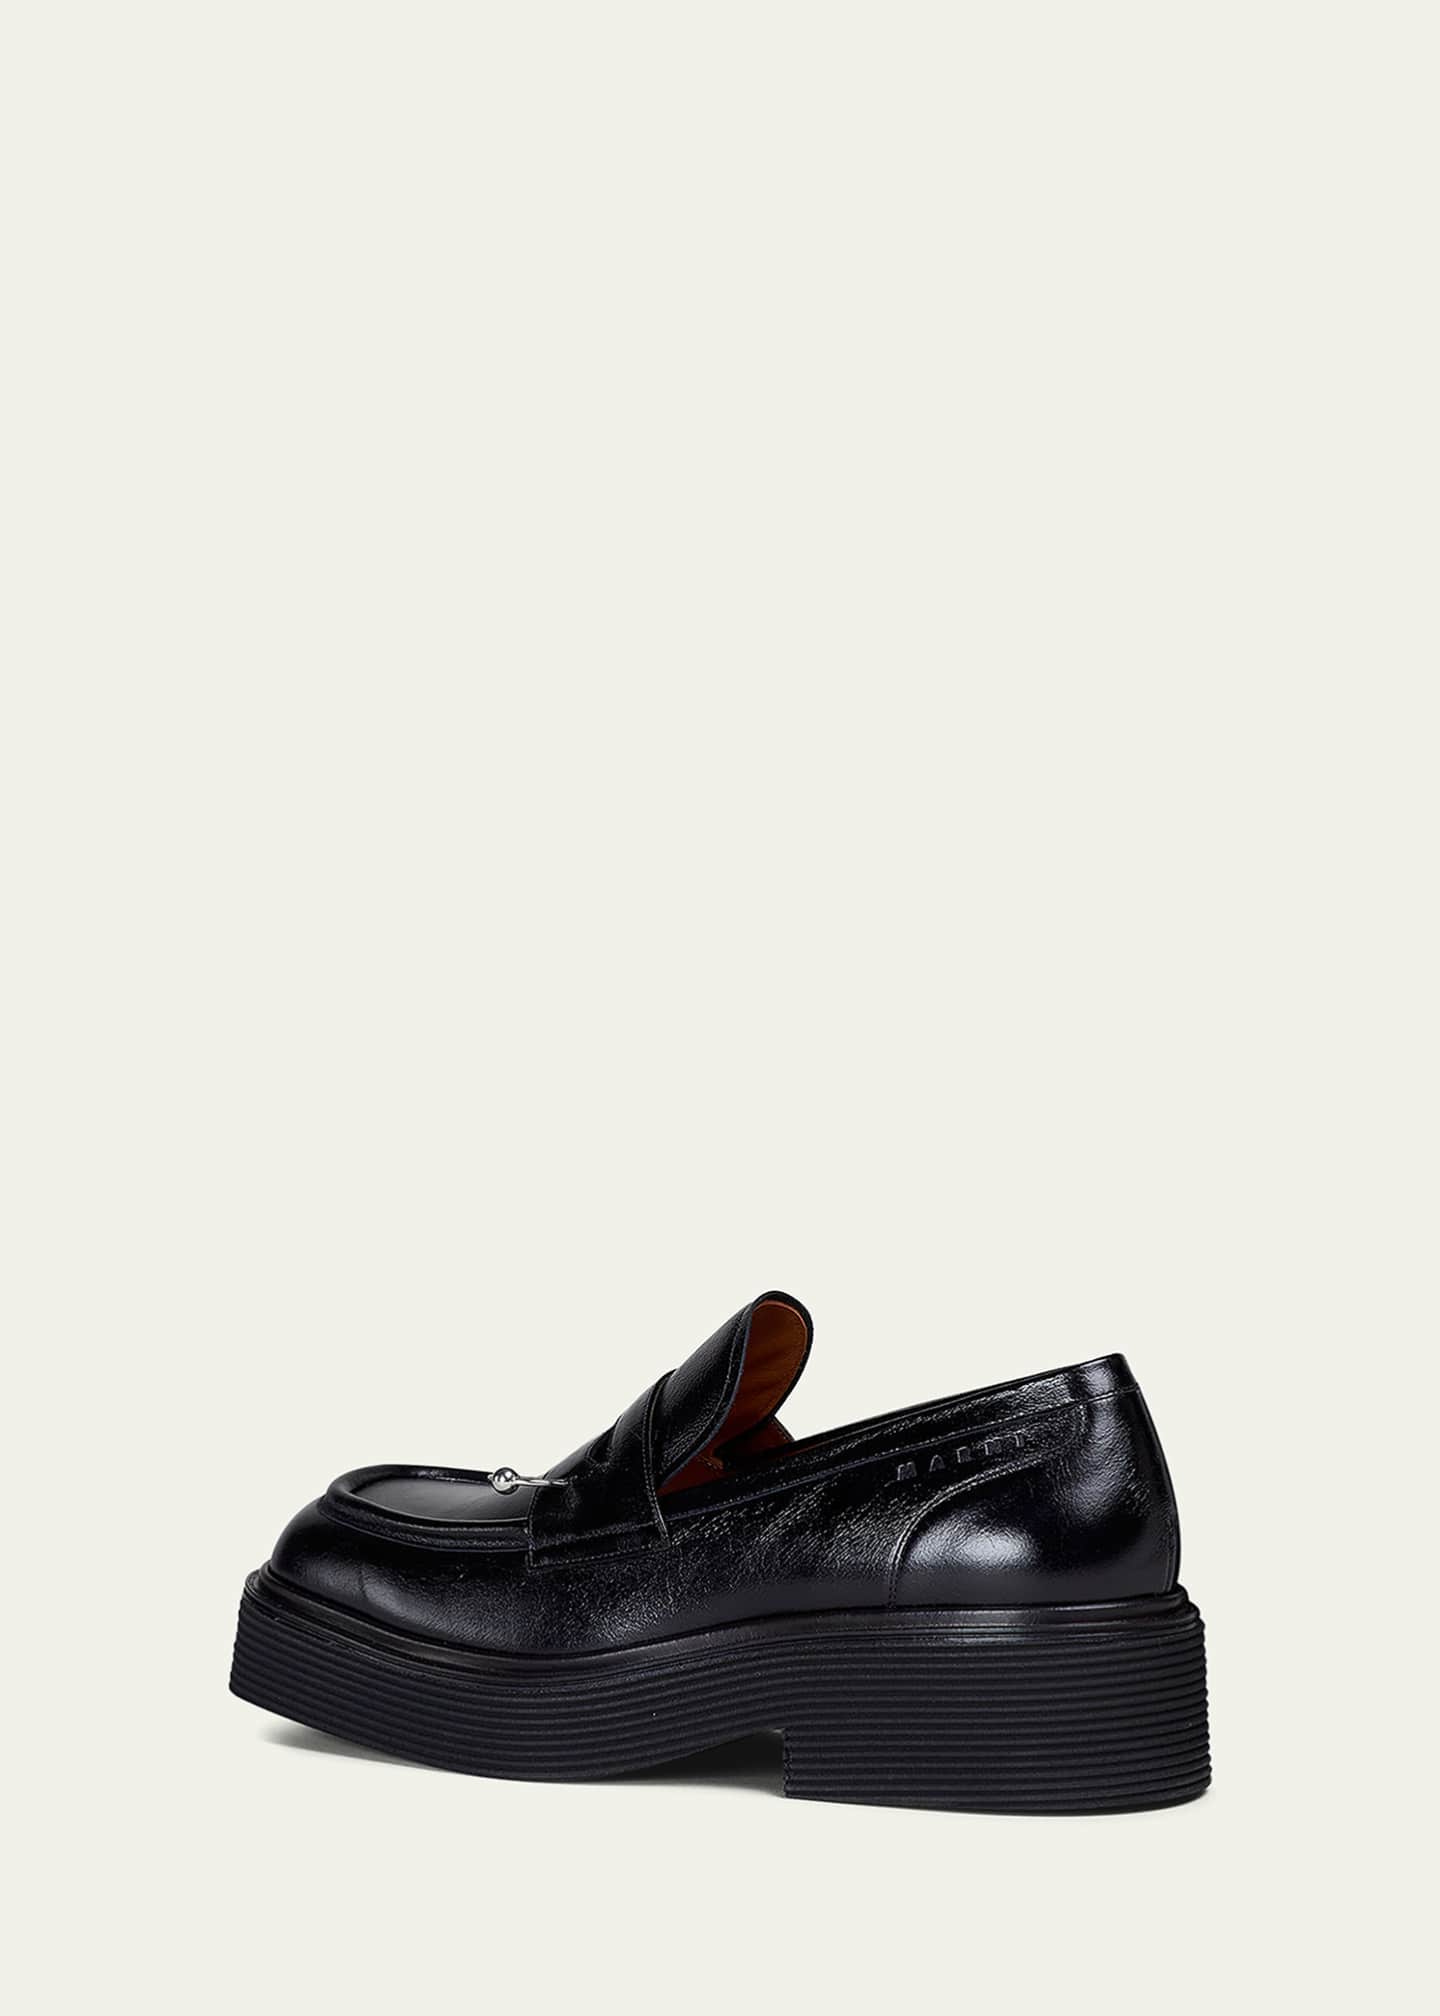 Marni Leather Piercing Penny Loafers - Bergdorf Goodman